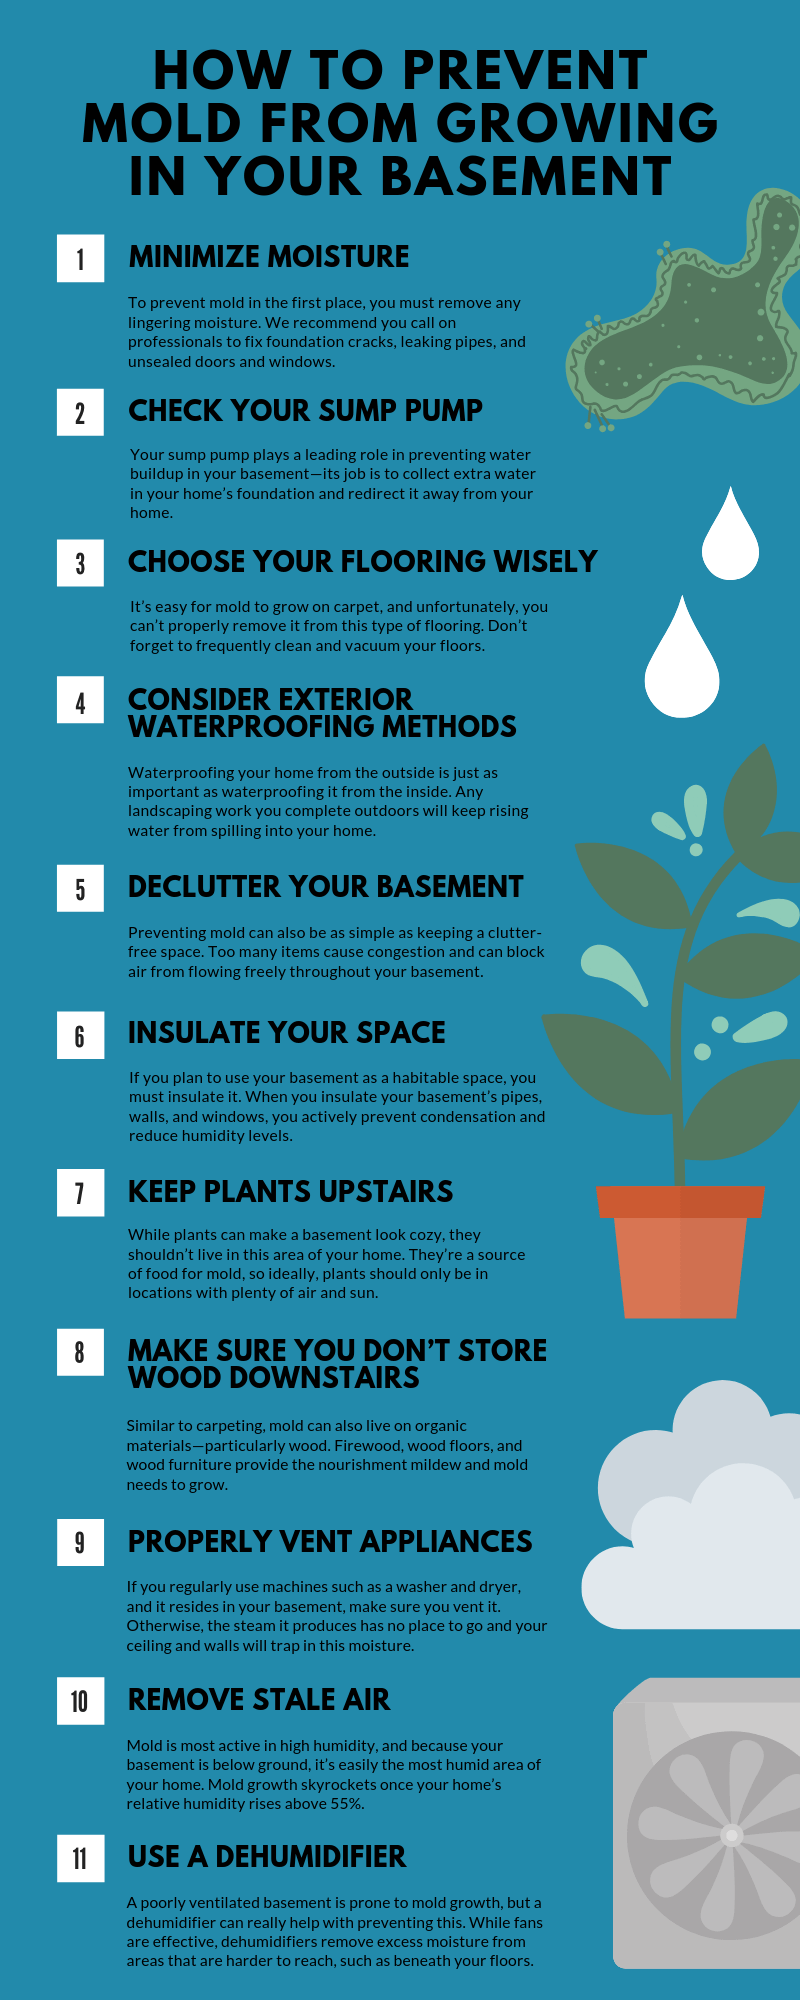 8 Ways To Prevent Mold From Growning In Your Basement